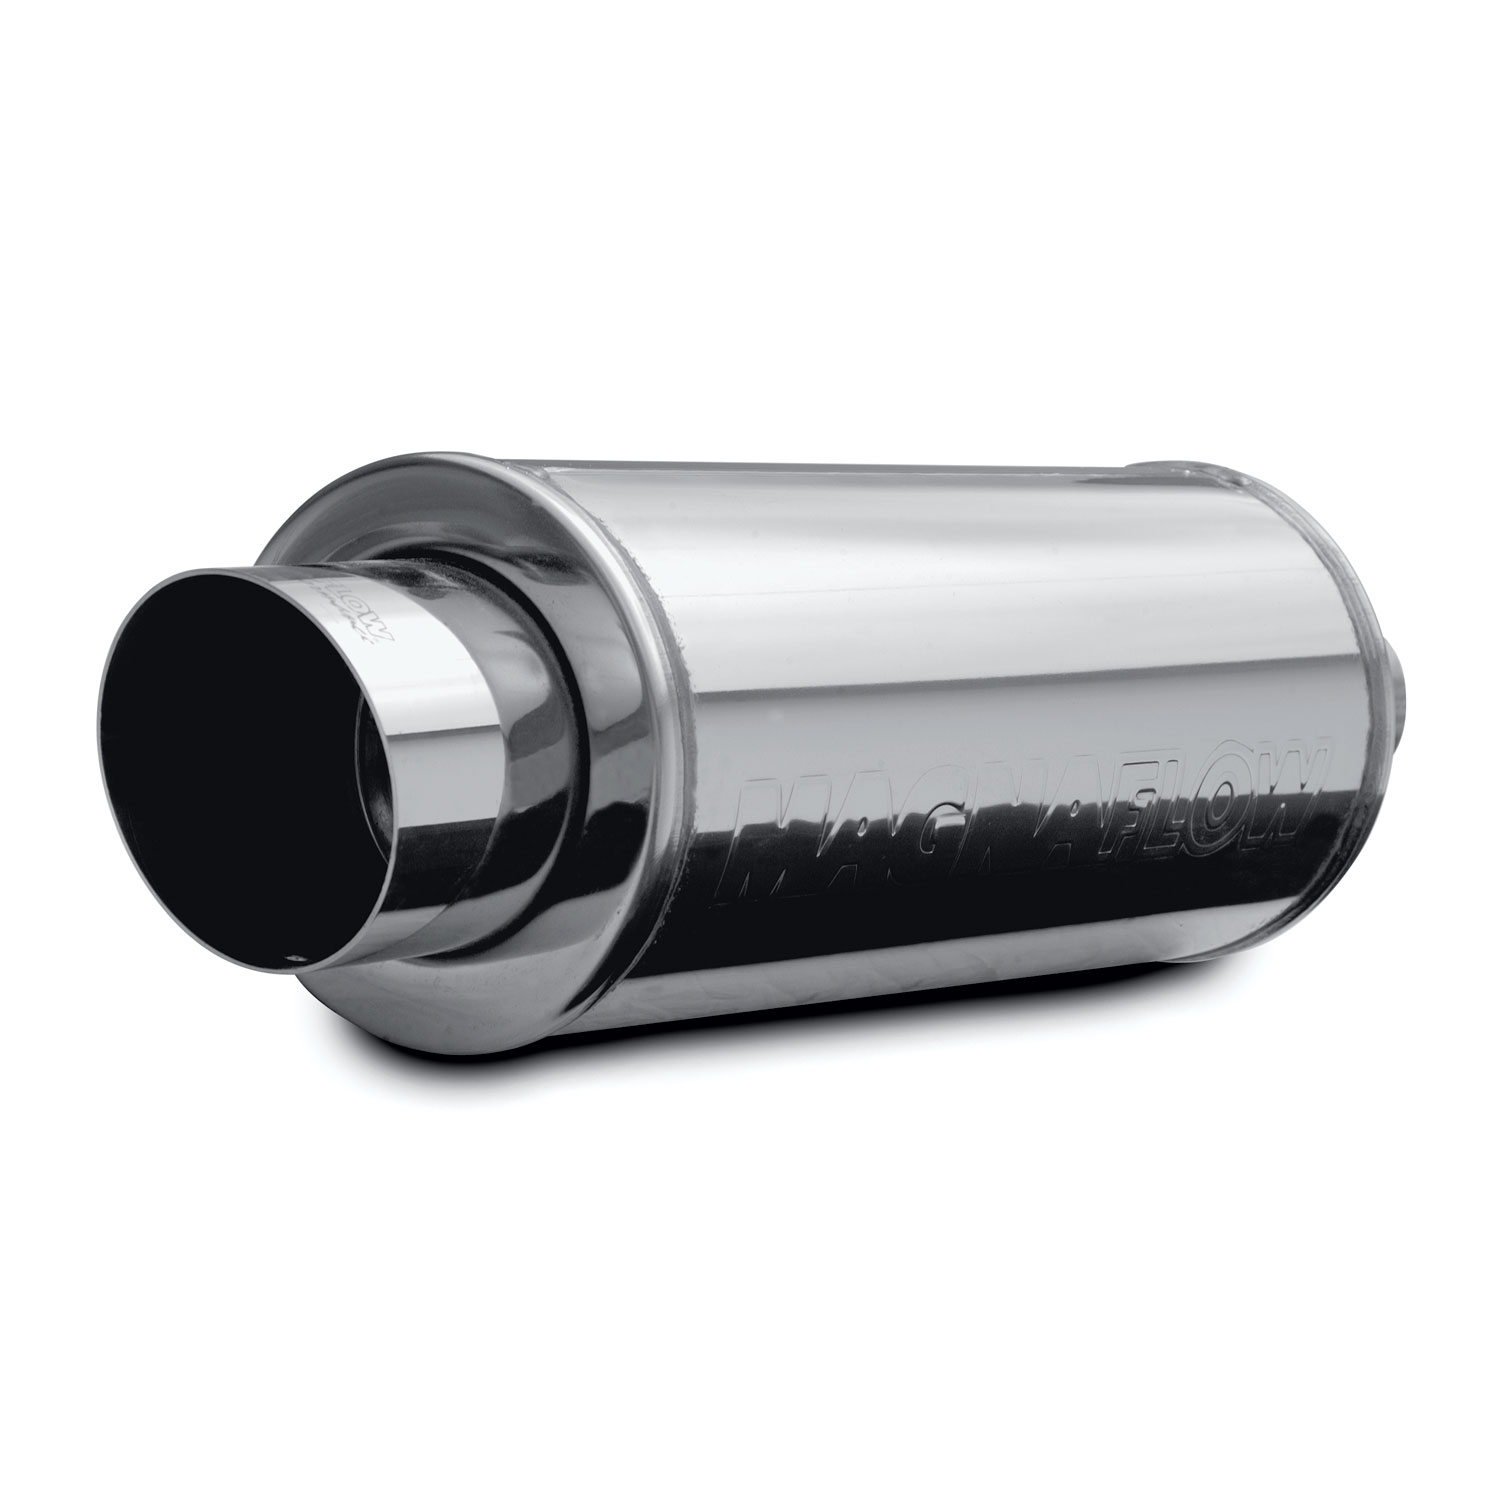 Magnaflow 14818 Street Series Polished Stainless Steel Oval Muffler with Tip 